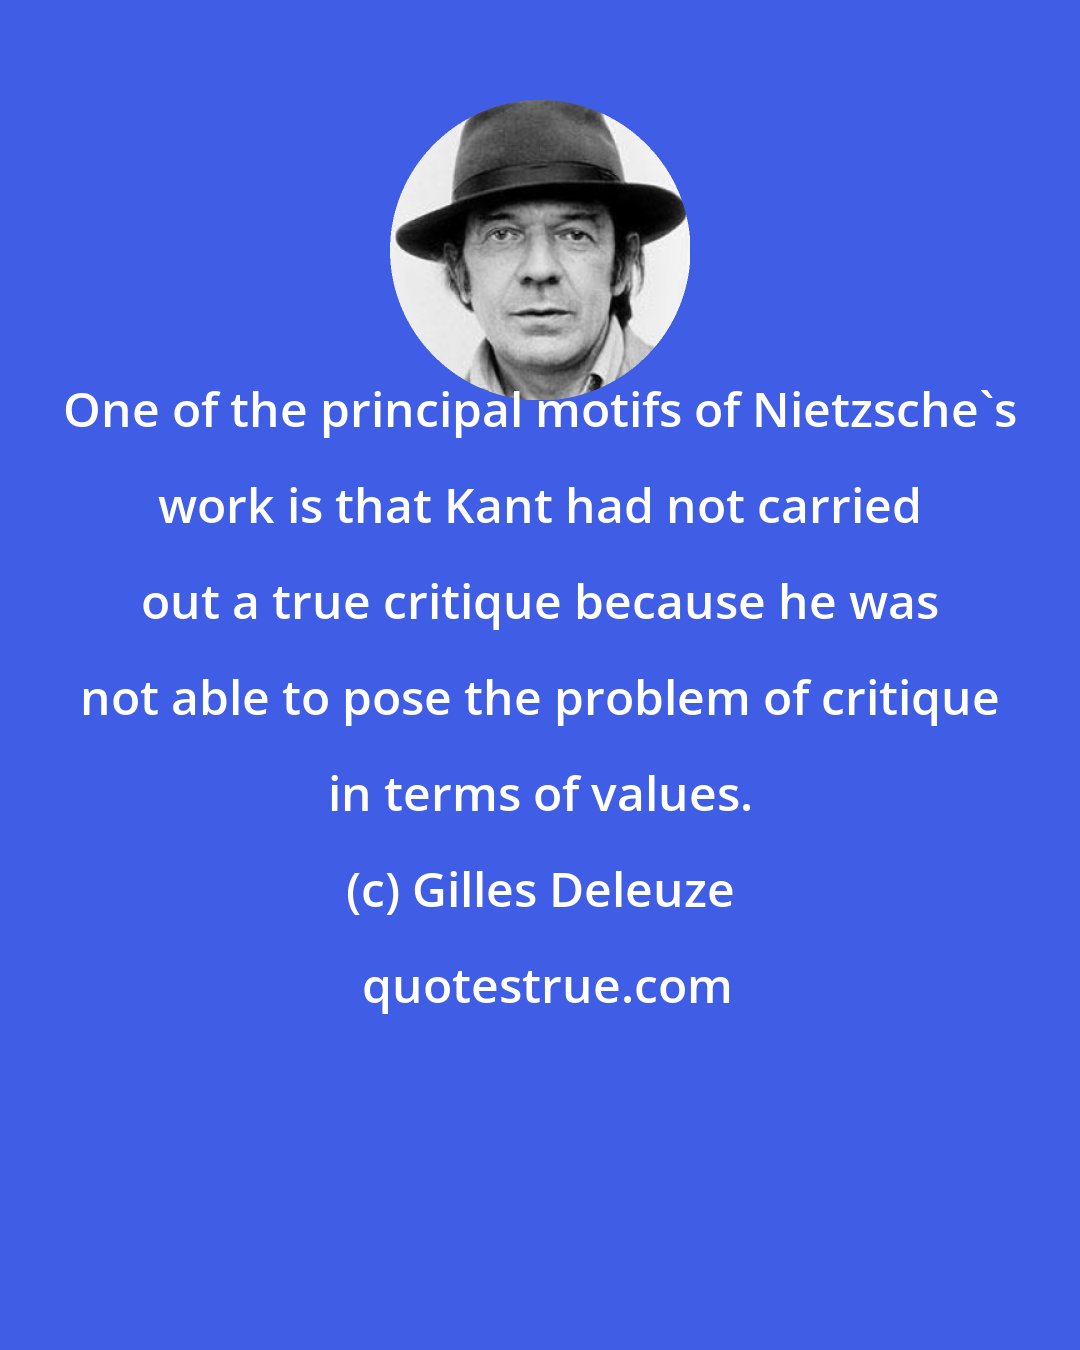 Gilles Deleuze: One of the principal motifs of Nietzsche's work is that Kant had not carried out a true critique because he was not able to pose the problem of critique in terms of values.